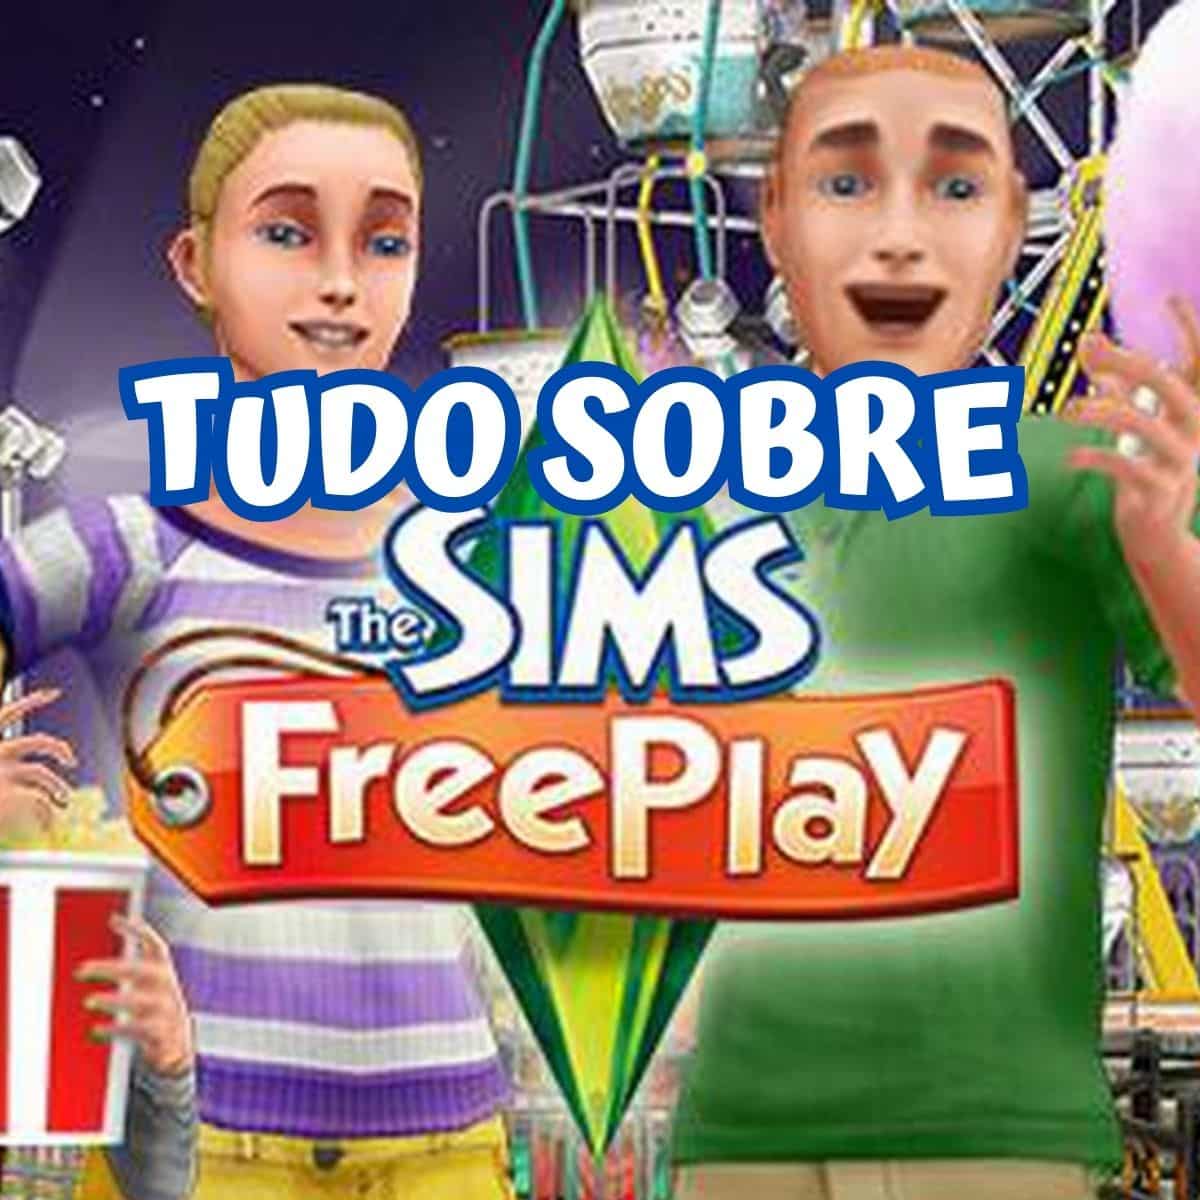 Behind the sims ep 3 | android, blackberry 10, ea games, ios, kindle fire, maxis, mobile, multiplayer, pc, singleplayer, the sims freeplay, webos, windows phone | the sims freeplay: jogue the sims onde e quando quiser | 81615947 capa | notícias